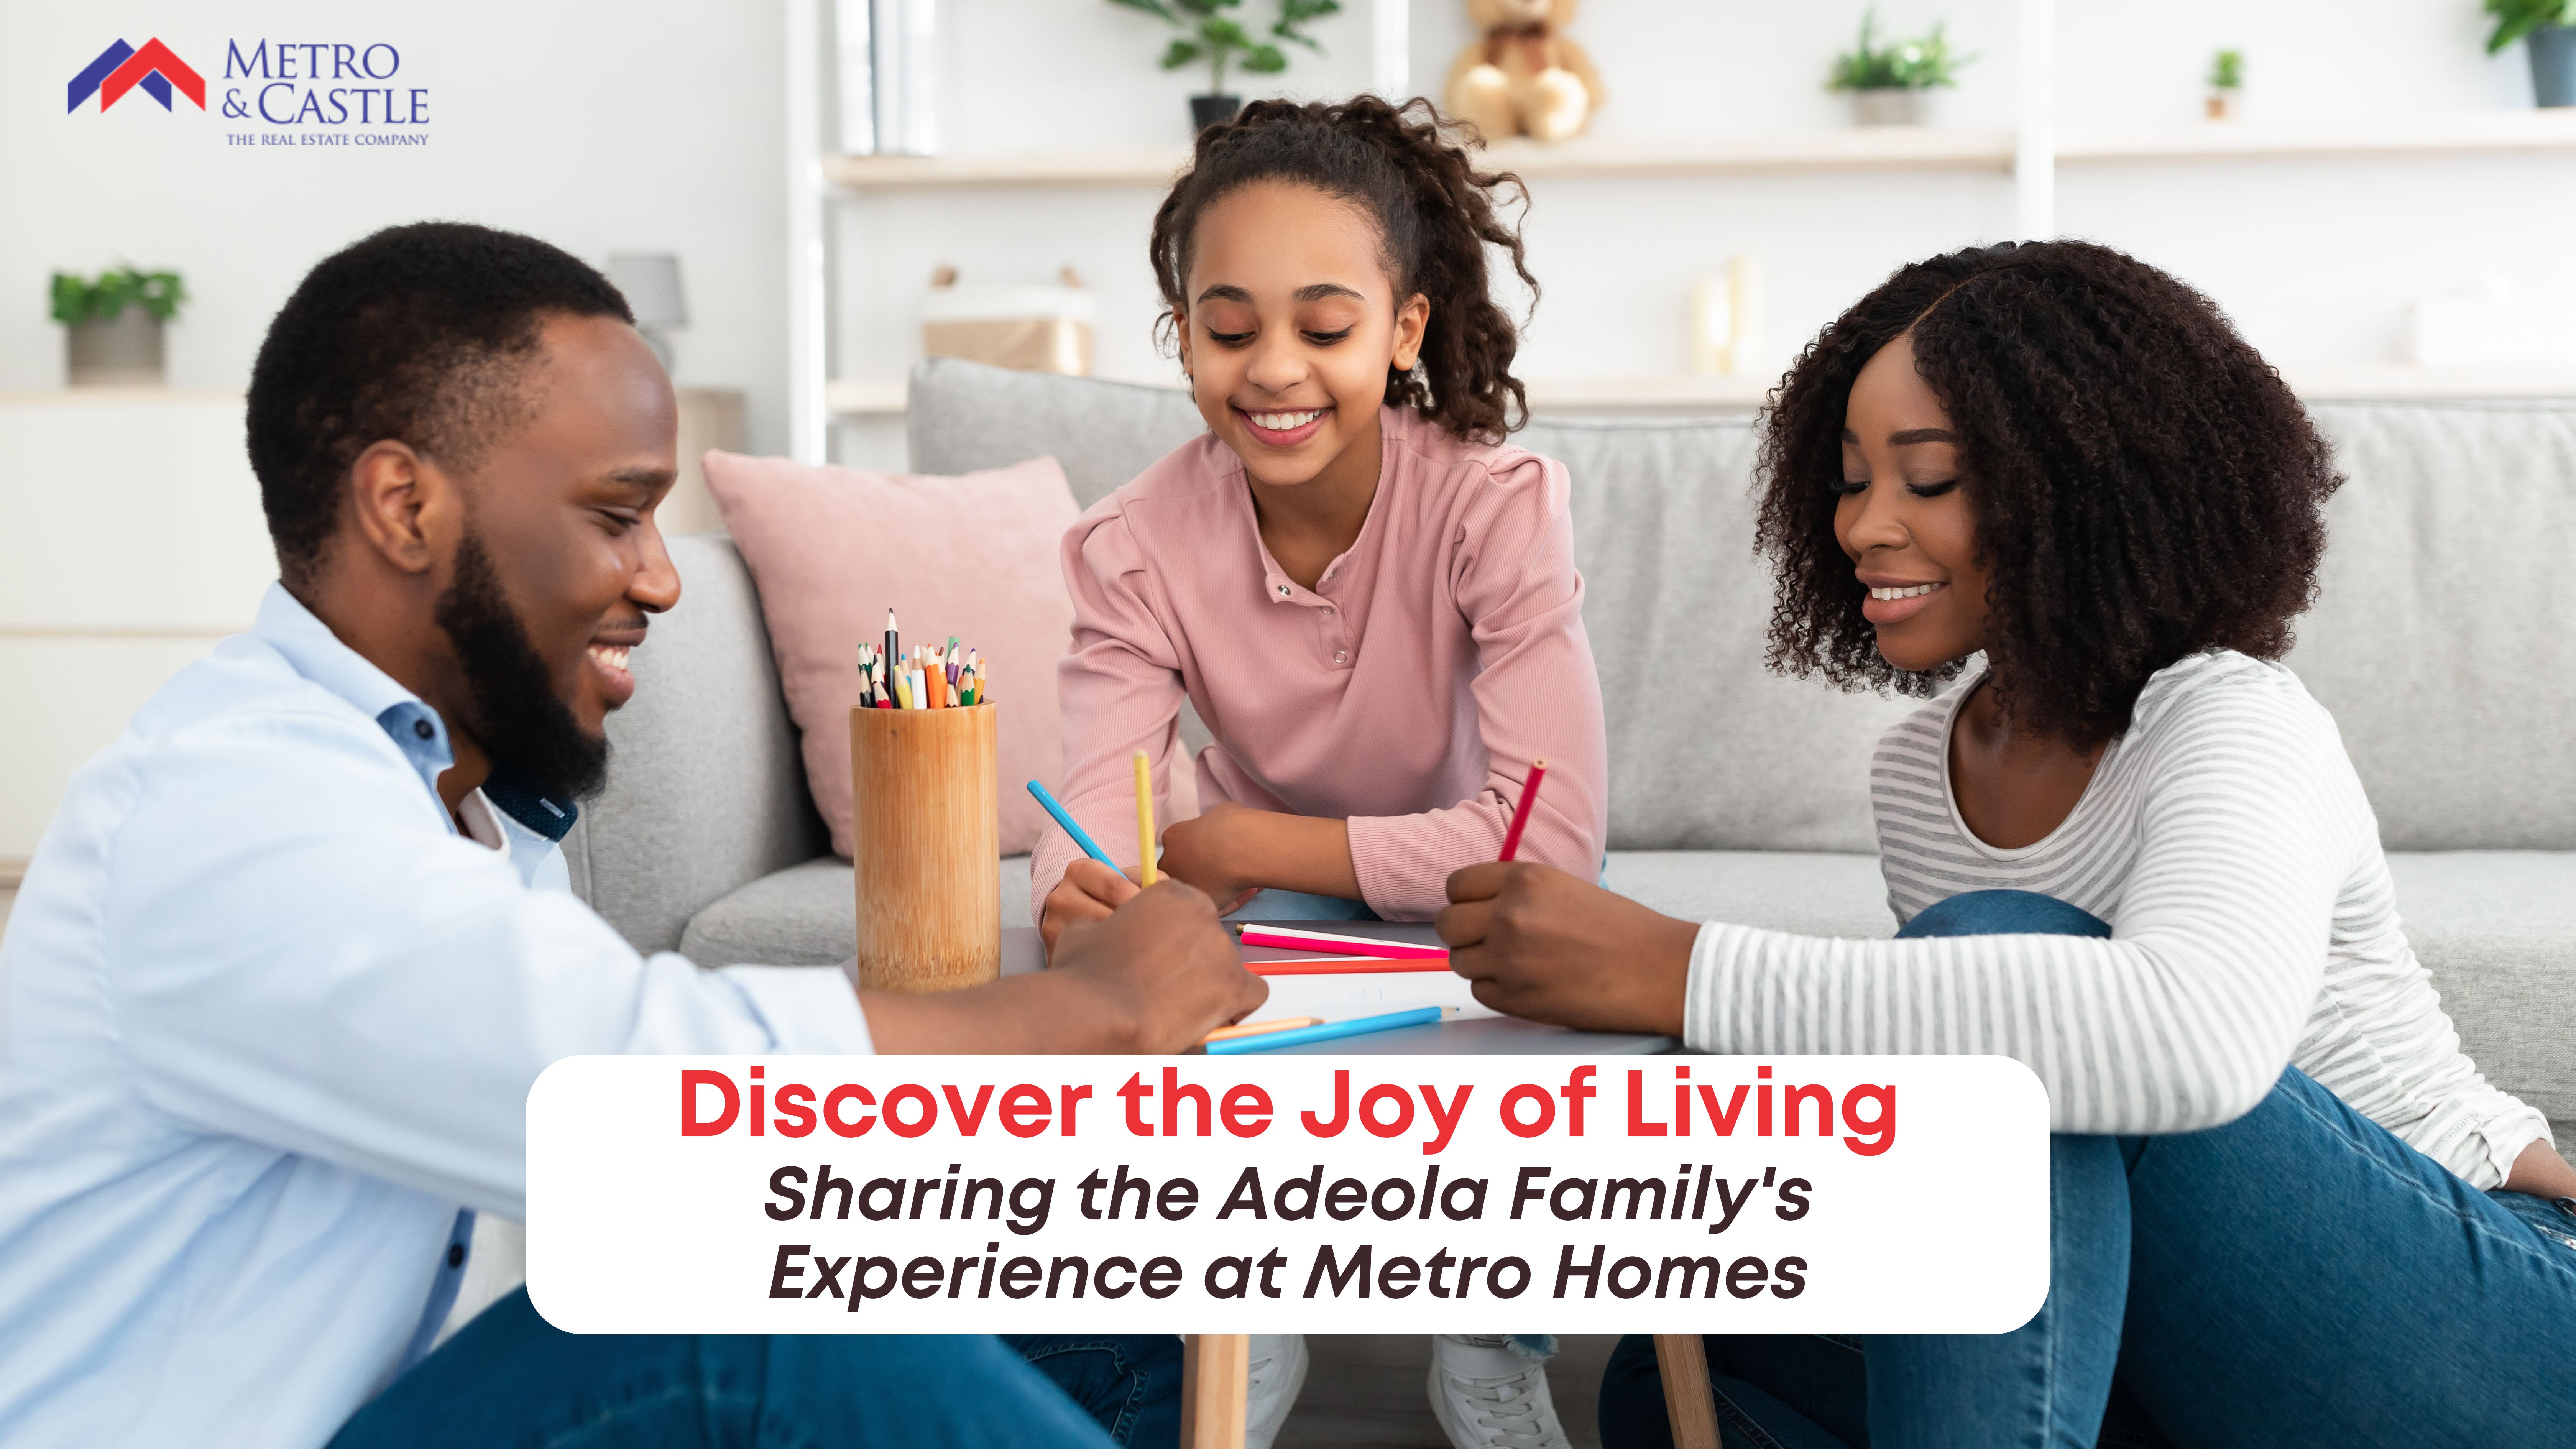 Discover the joy of Living at Metro Homes